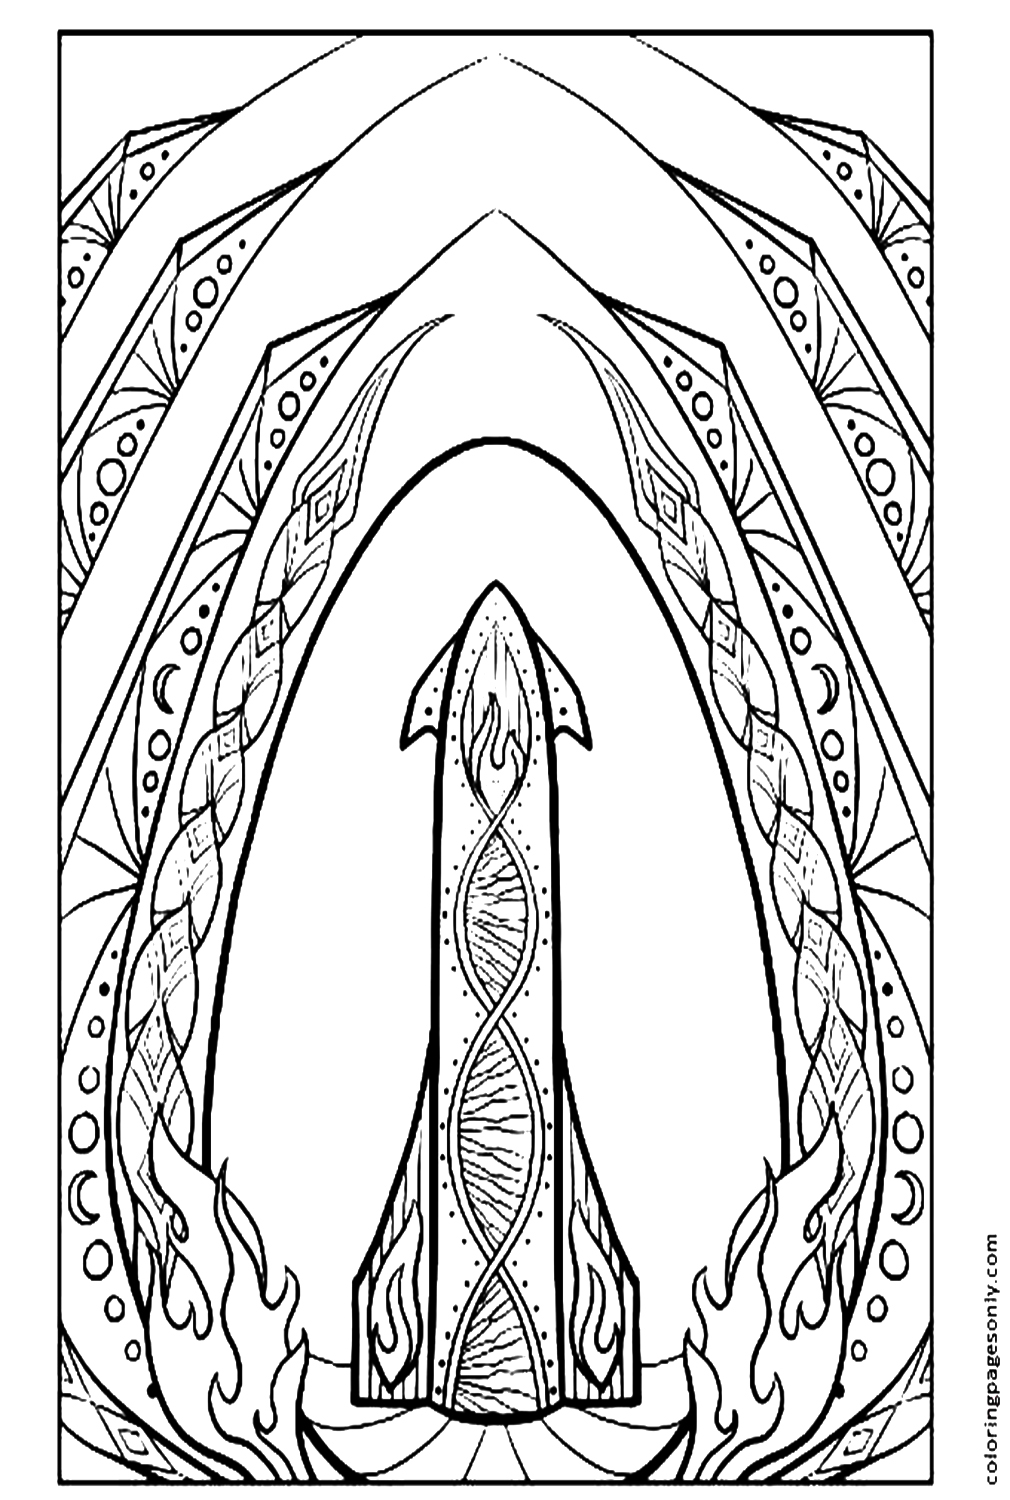 Elon Musk Inspiration Coloring Pages from Elon Musk